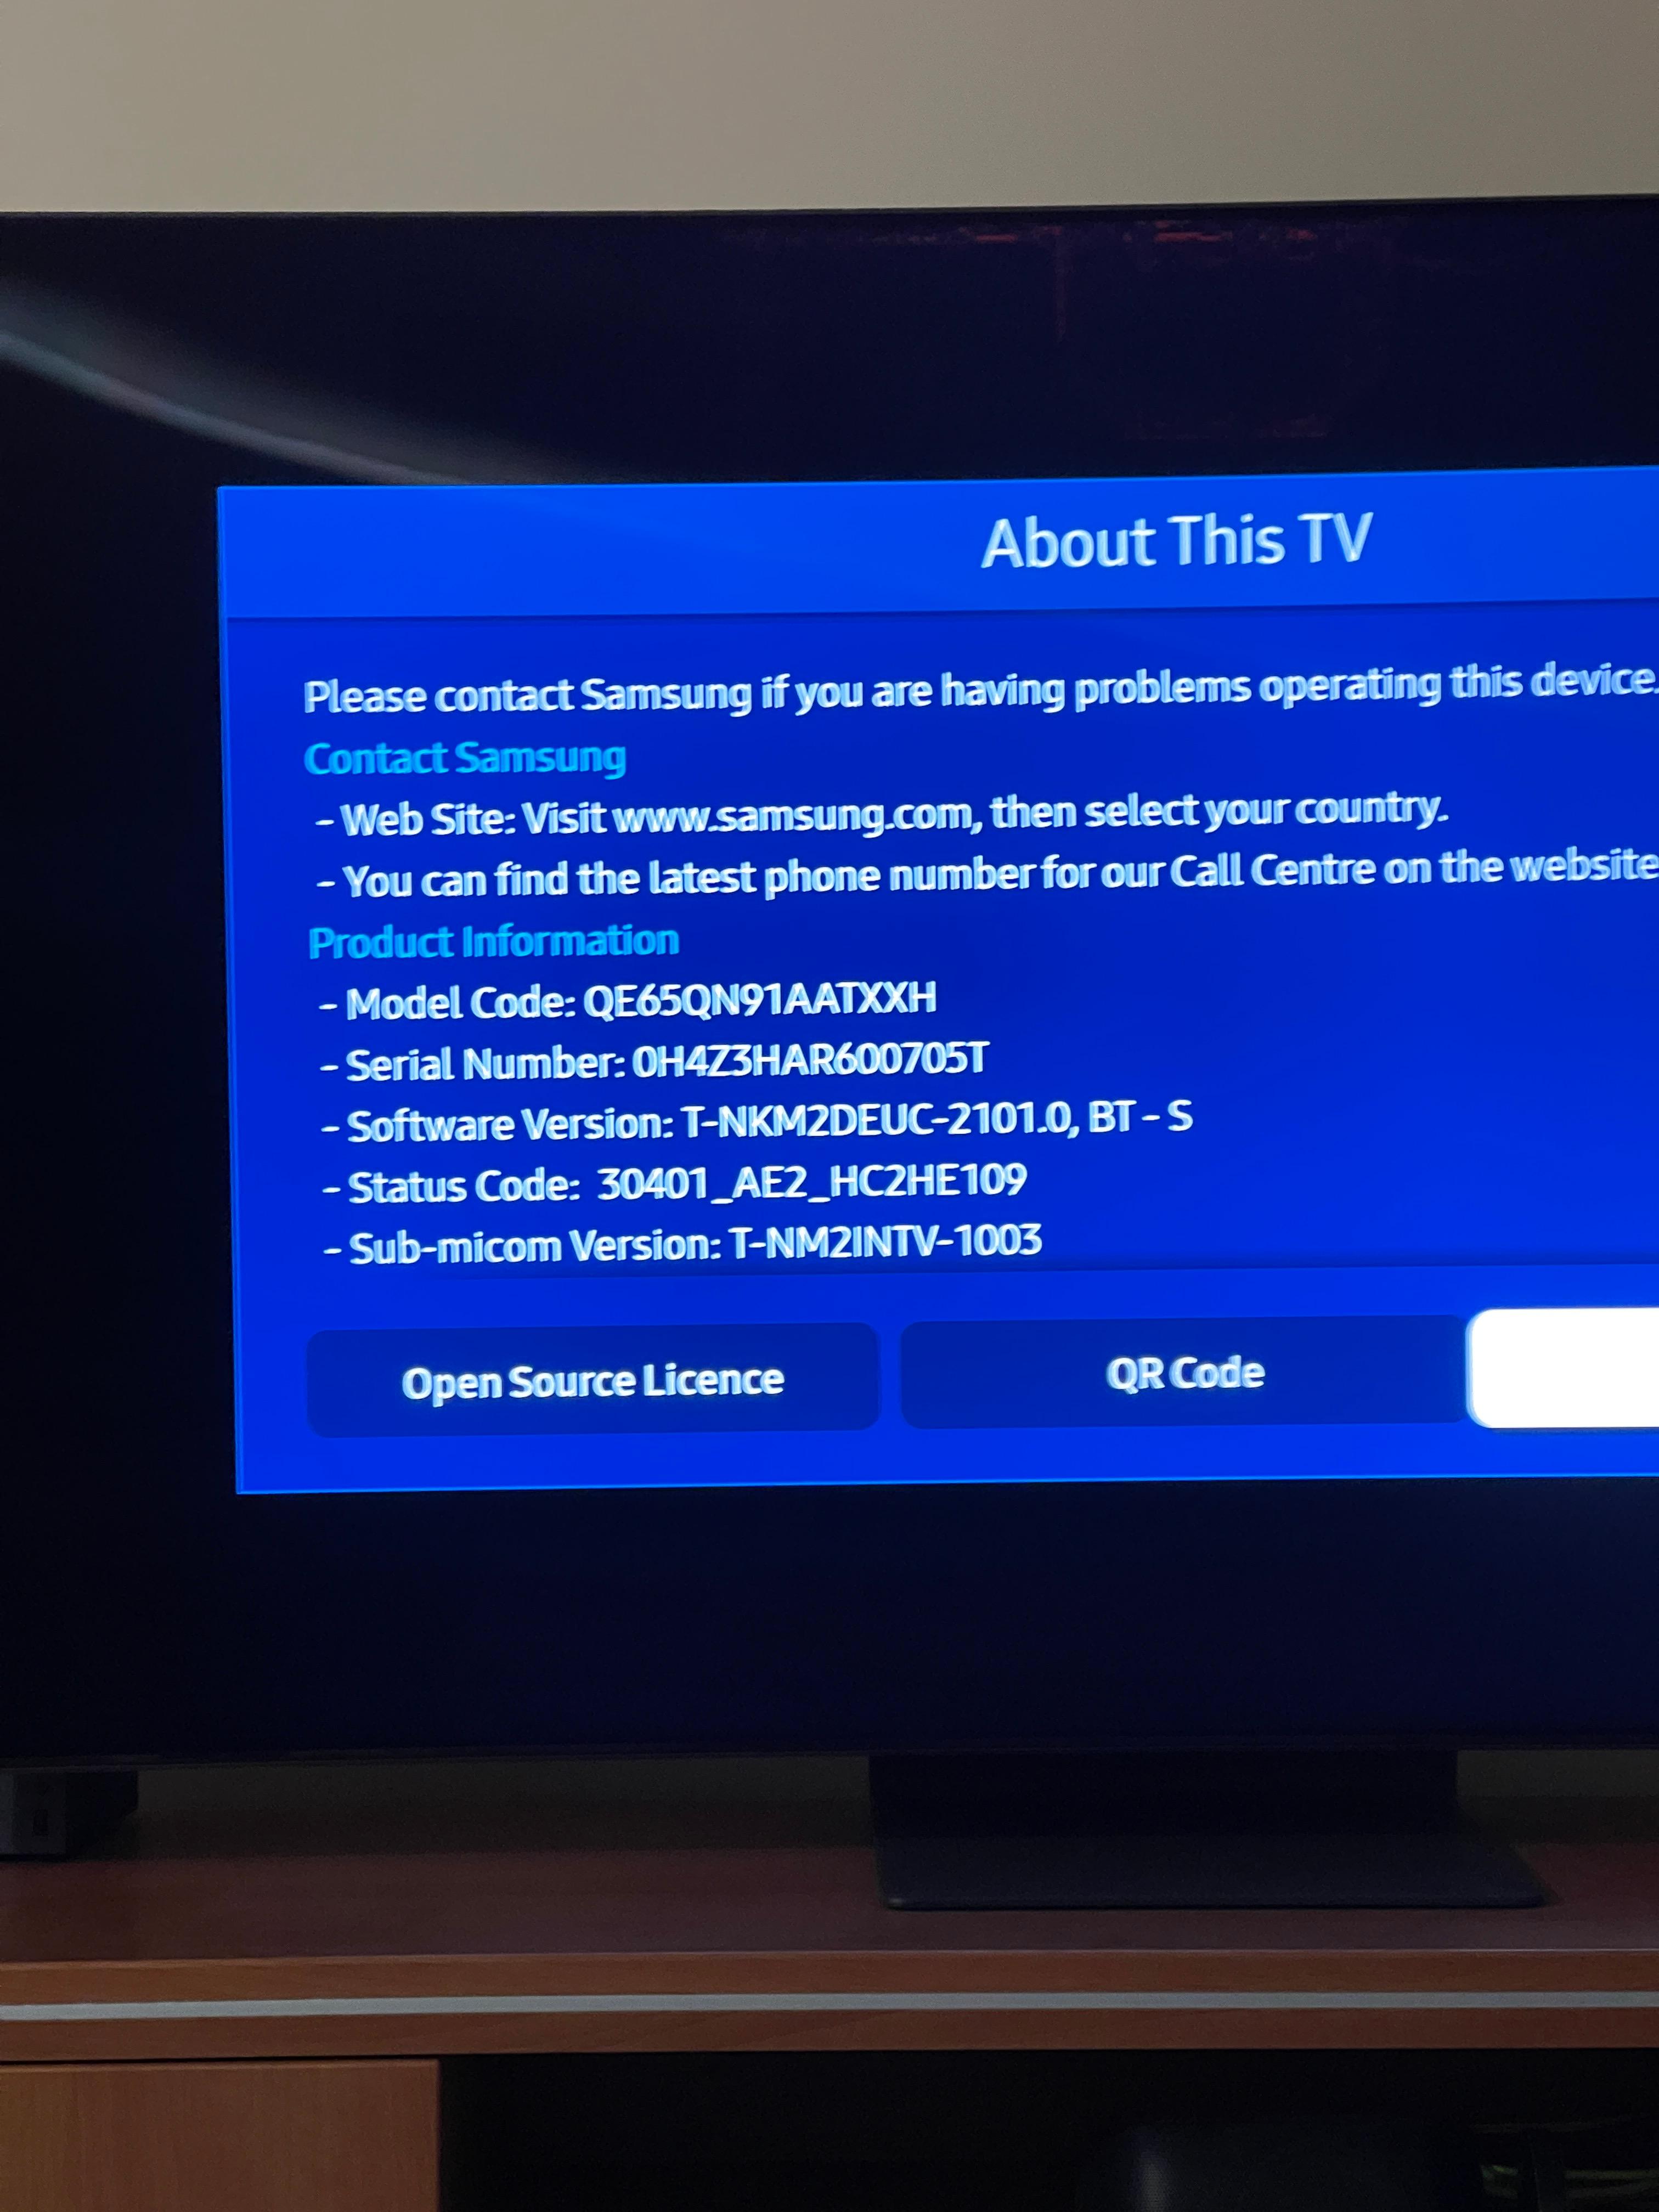 QN91A - Can't enable VRR on Xbox Series X - Samsung Community